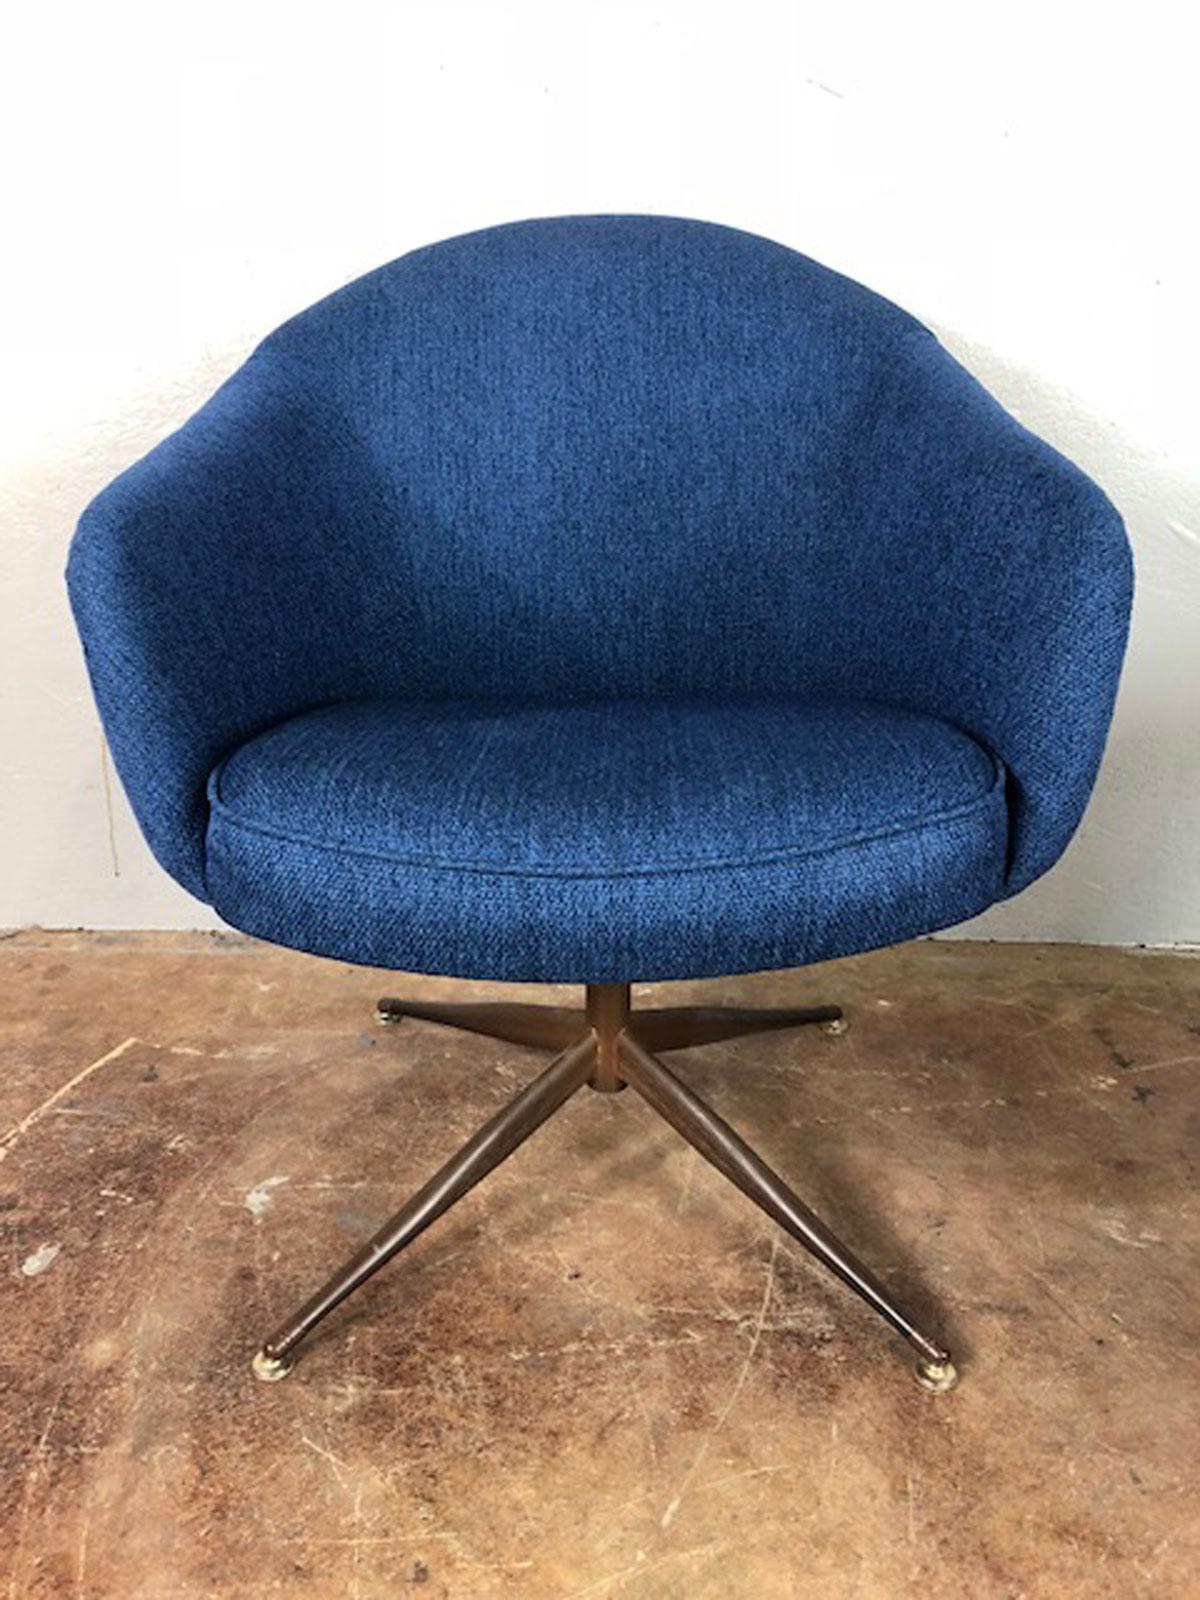 Pair of newly reupholstered Baumritter Viko club chairs, circa 1960s.